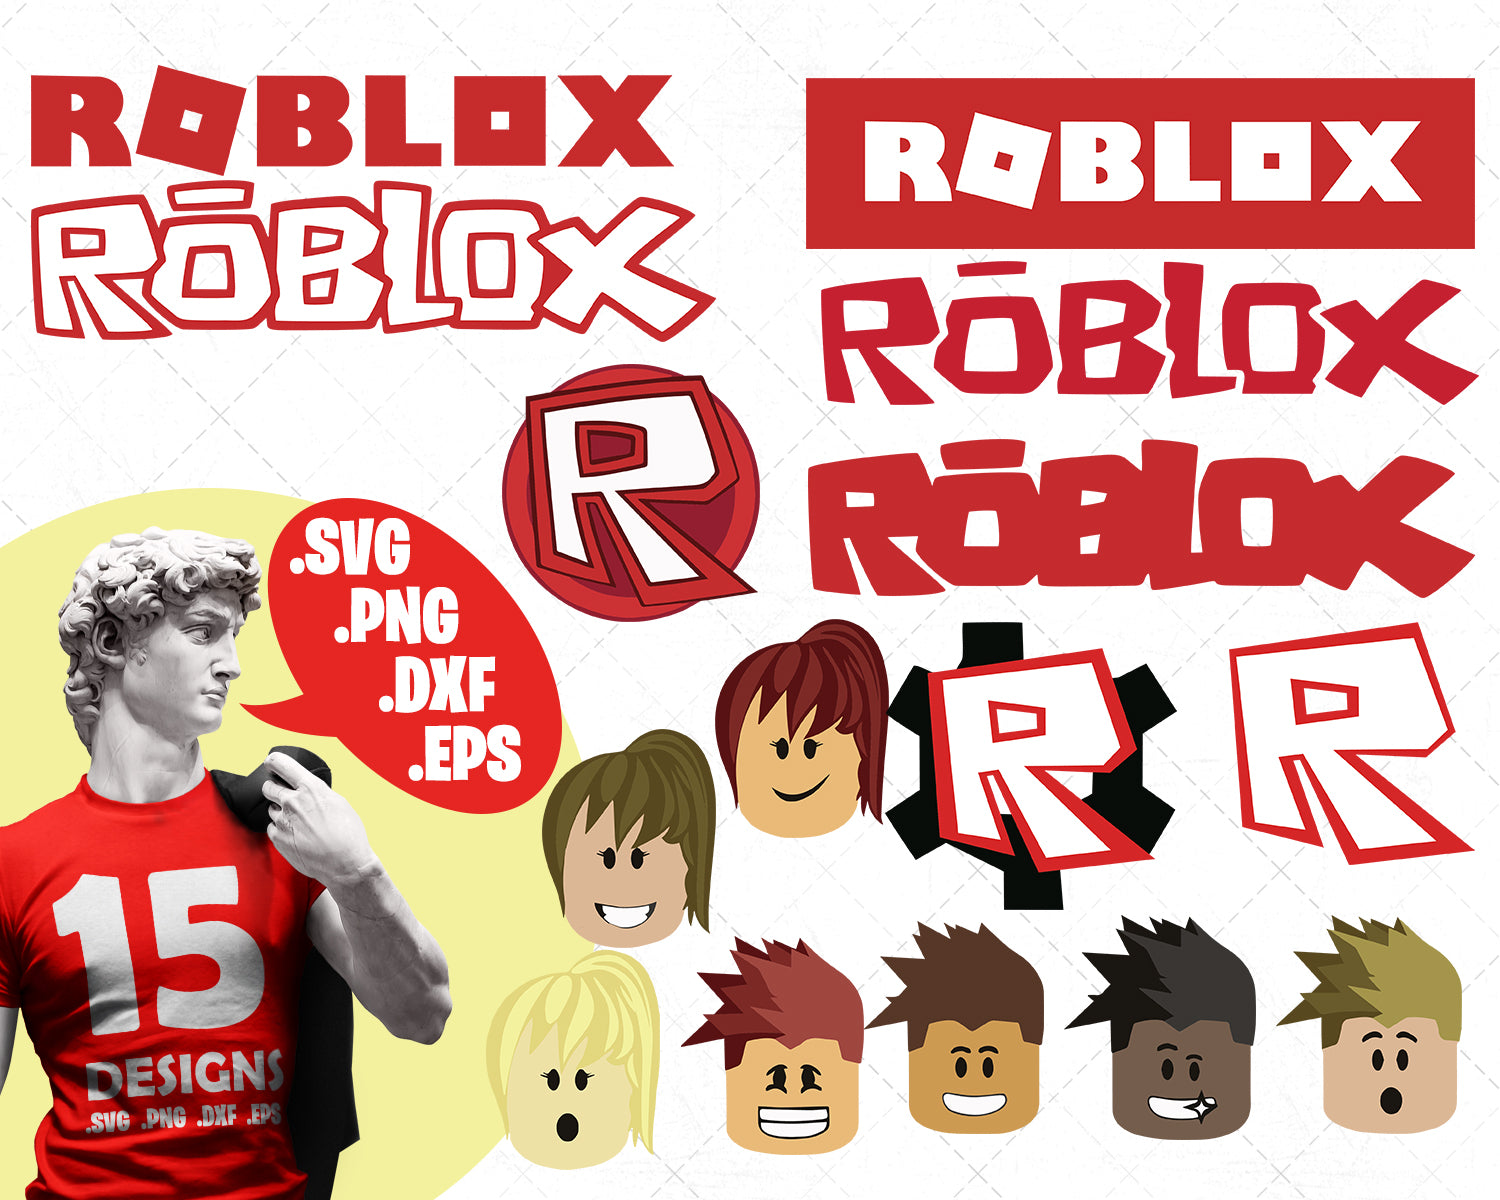 Roblox Svg Roblox Alphabet Svg Roblox Font Svg Roblox Letter Roblo Svg Designs For Cutting And Printing - roblox alphabet letters